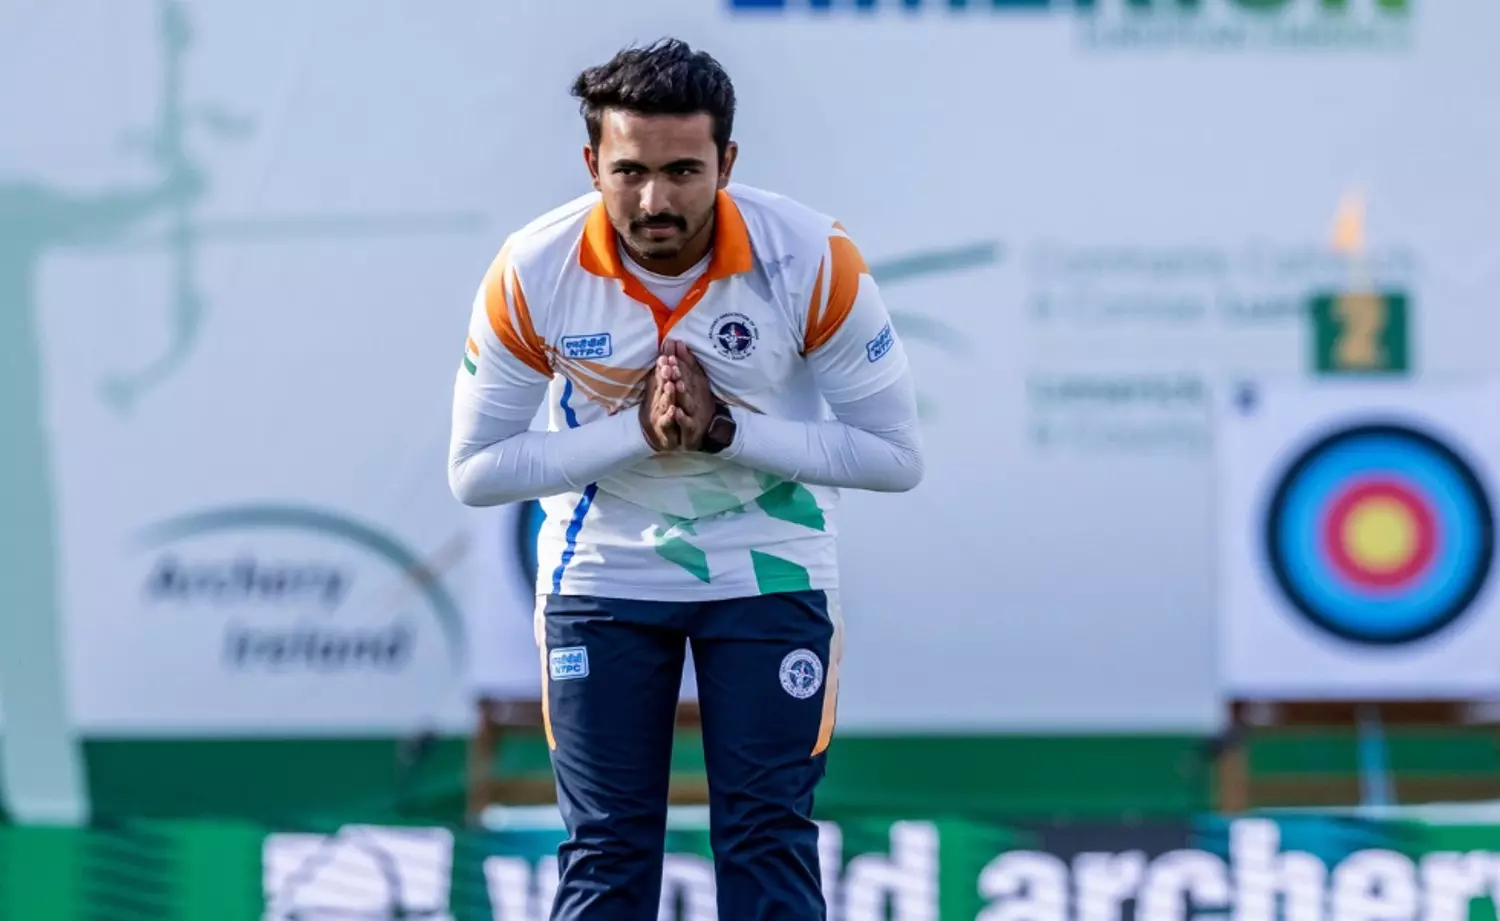 Parth Salunkhe wins Youth World Championship in recurve category